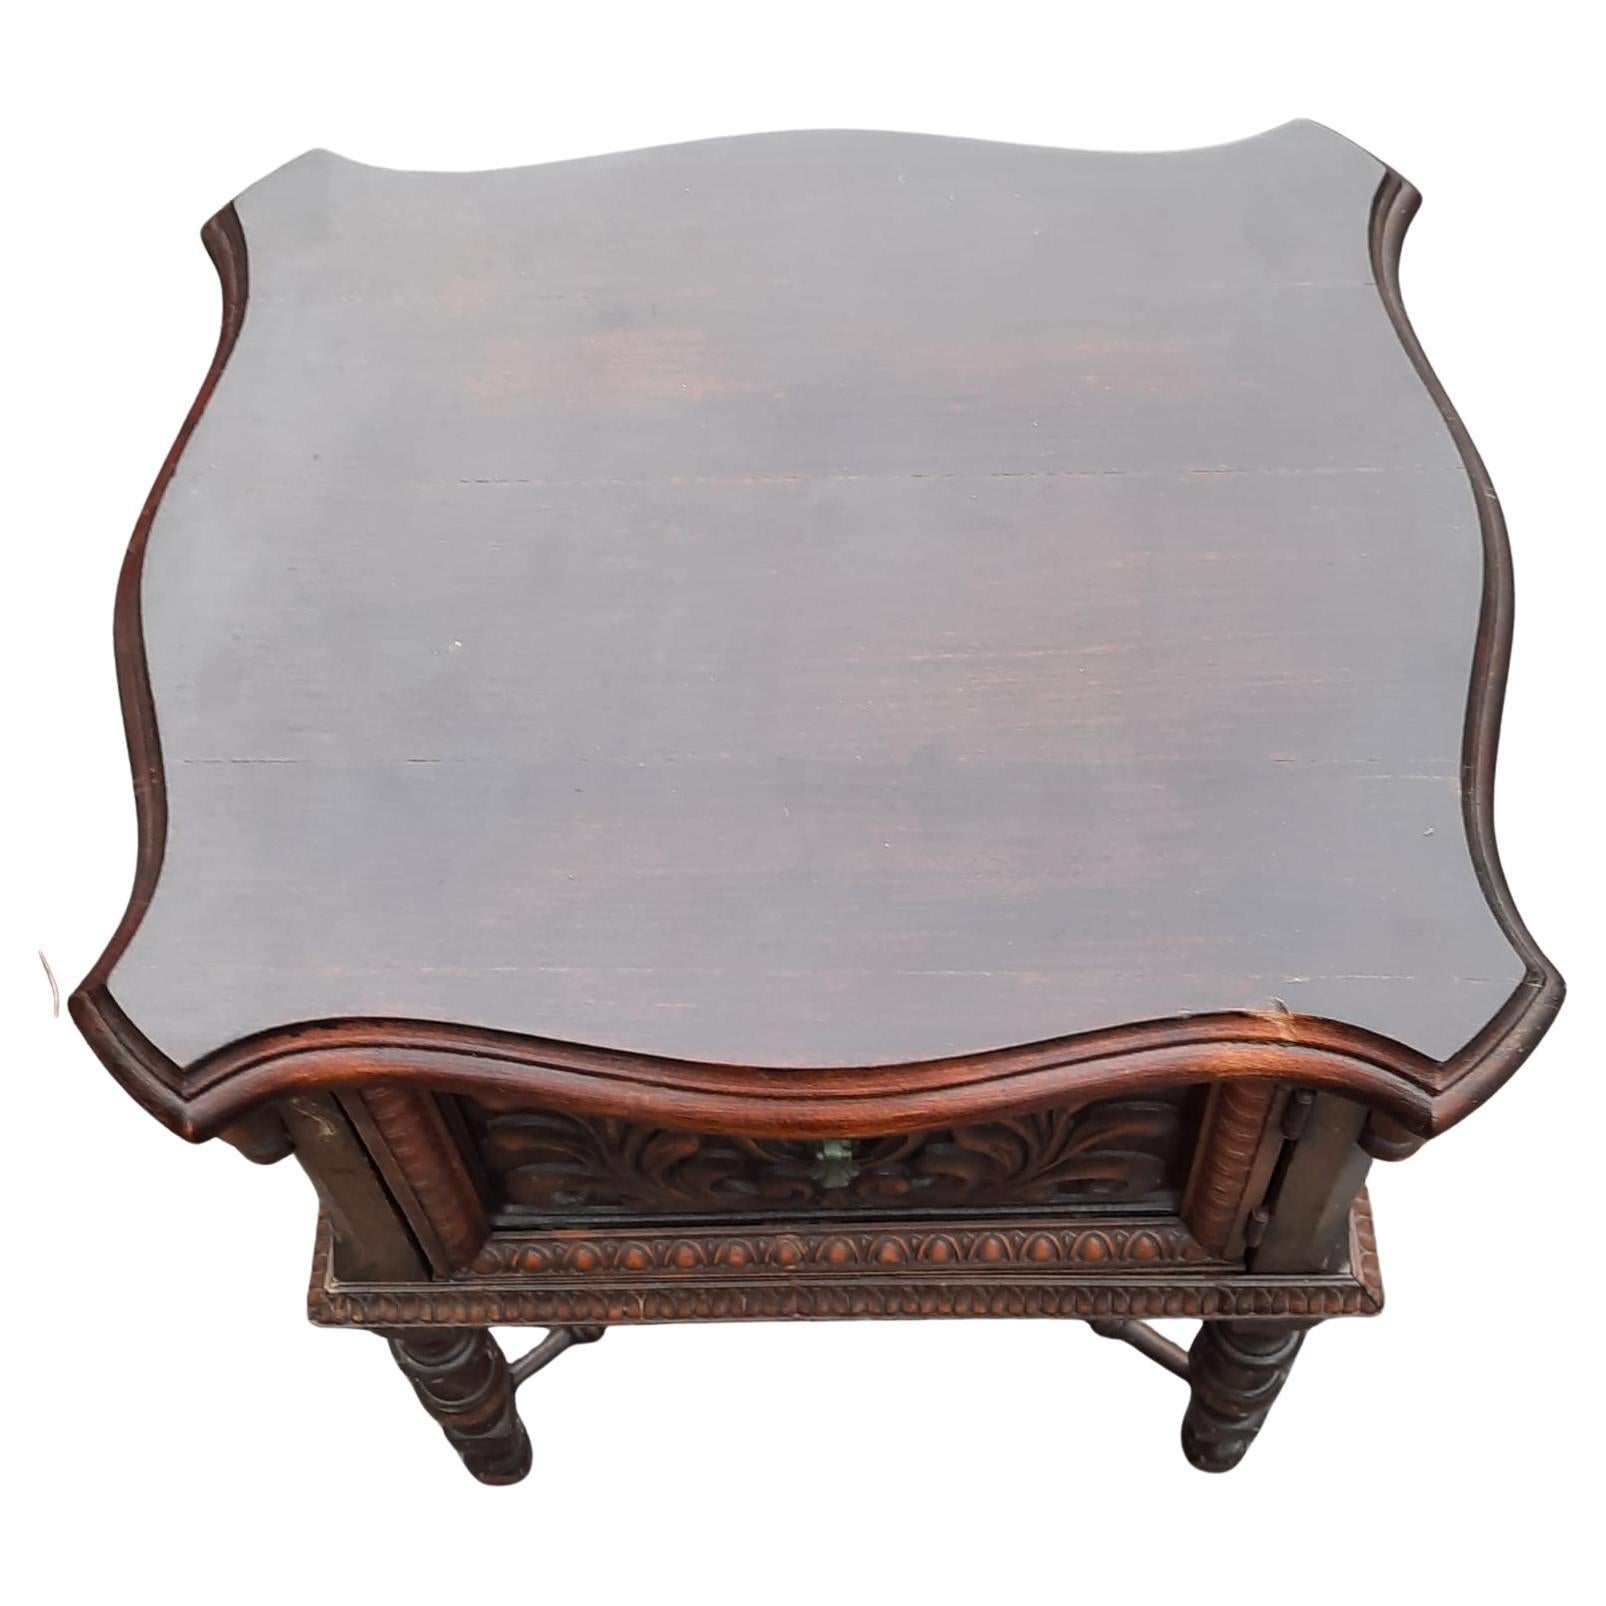 Hand-Carved Antique Jacobean Carved Walnut Side Table Nightstand w Copper Lining, C. 1920s